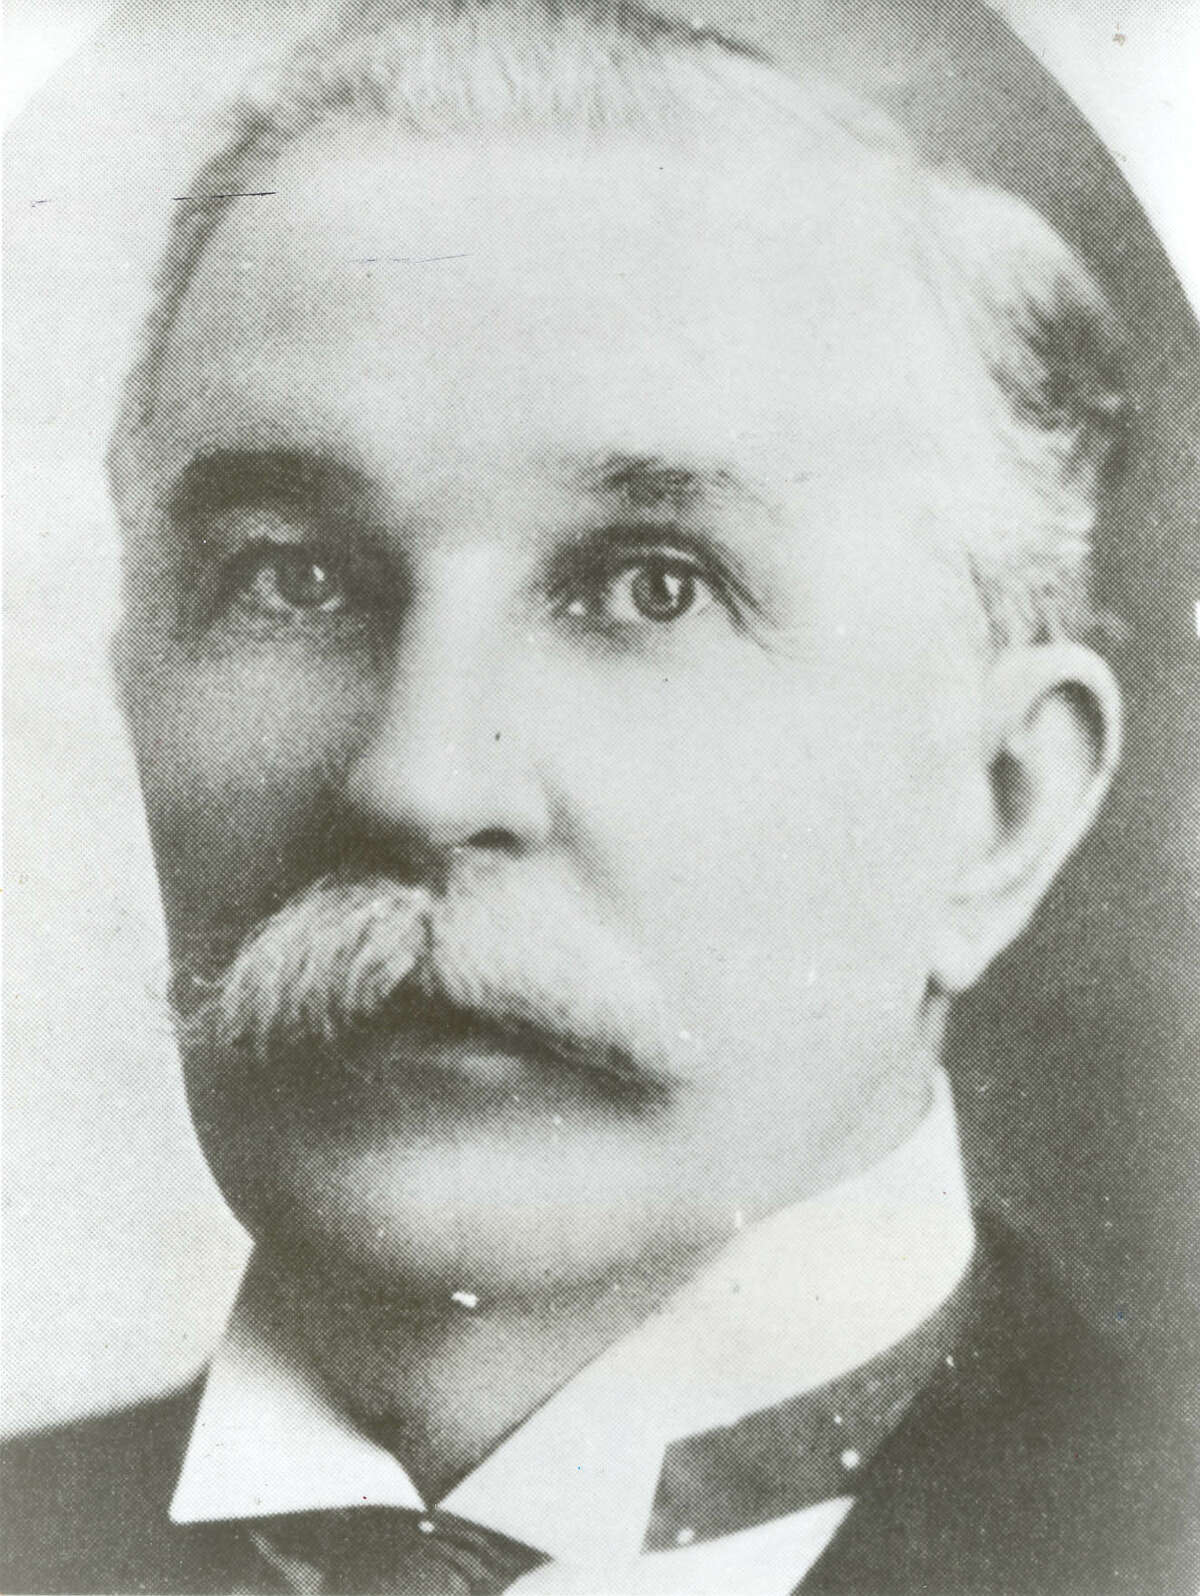 Col. Thomas Henry Ball - lawyer, congressman, and known as "Father of the Port of Houston" - is also the man for whom the city of Tomball was named after.